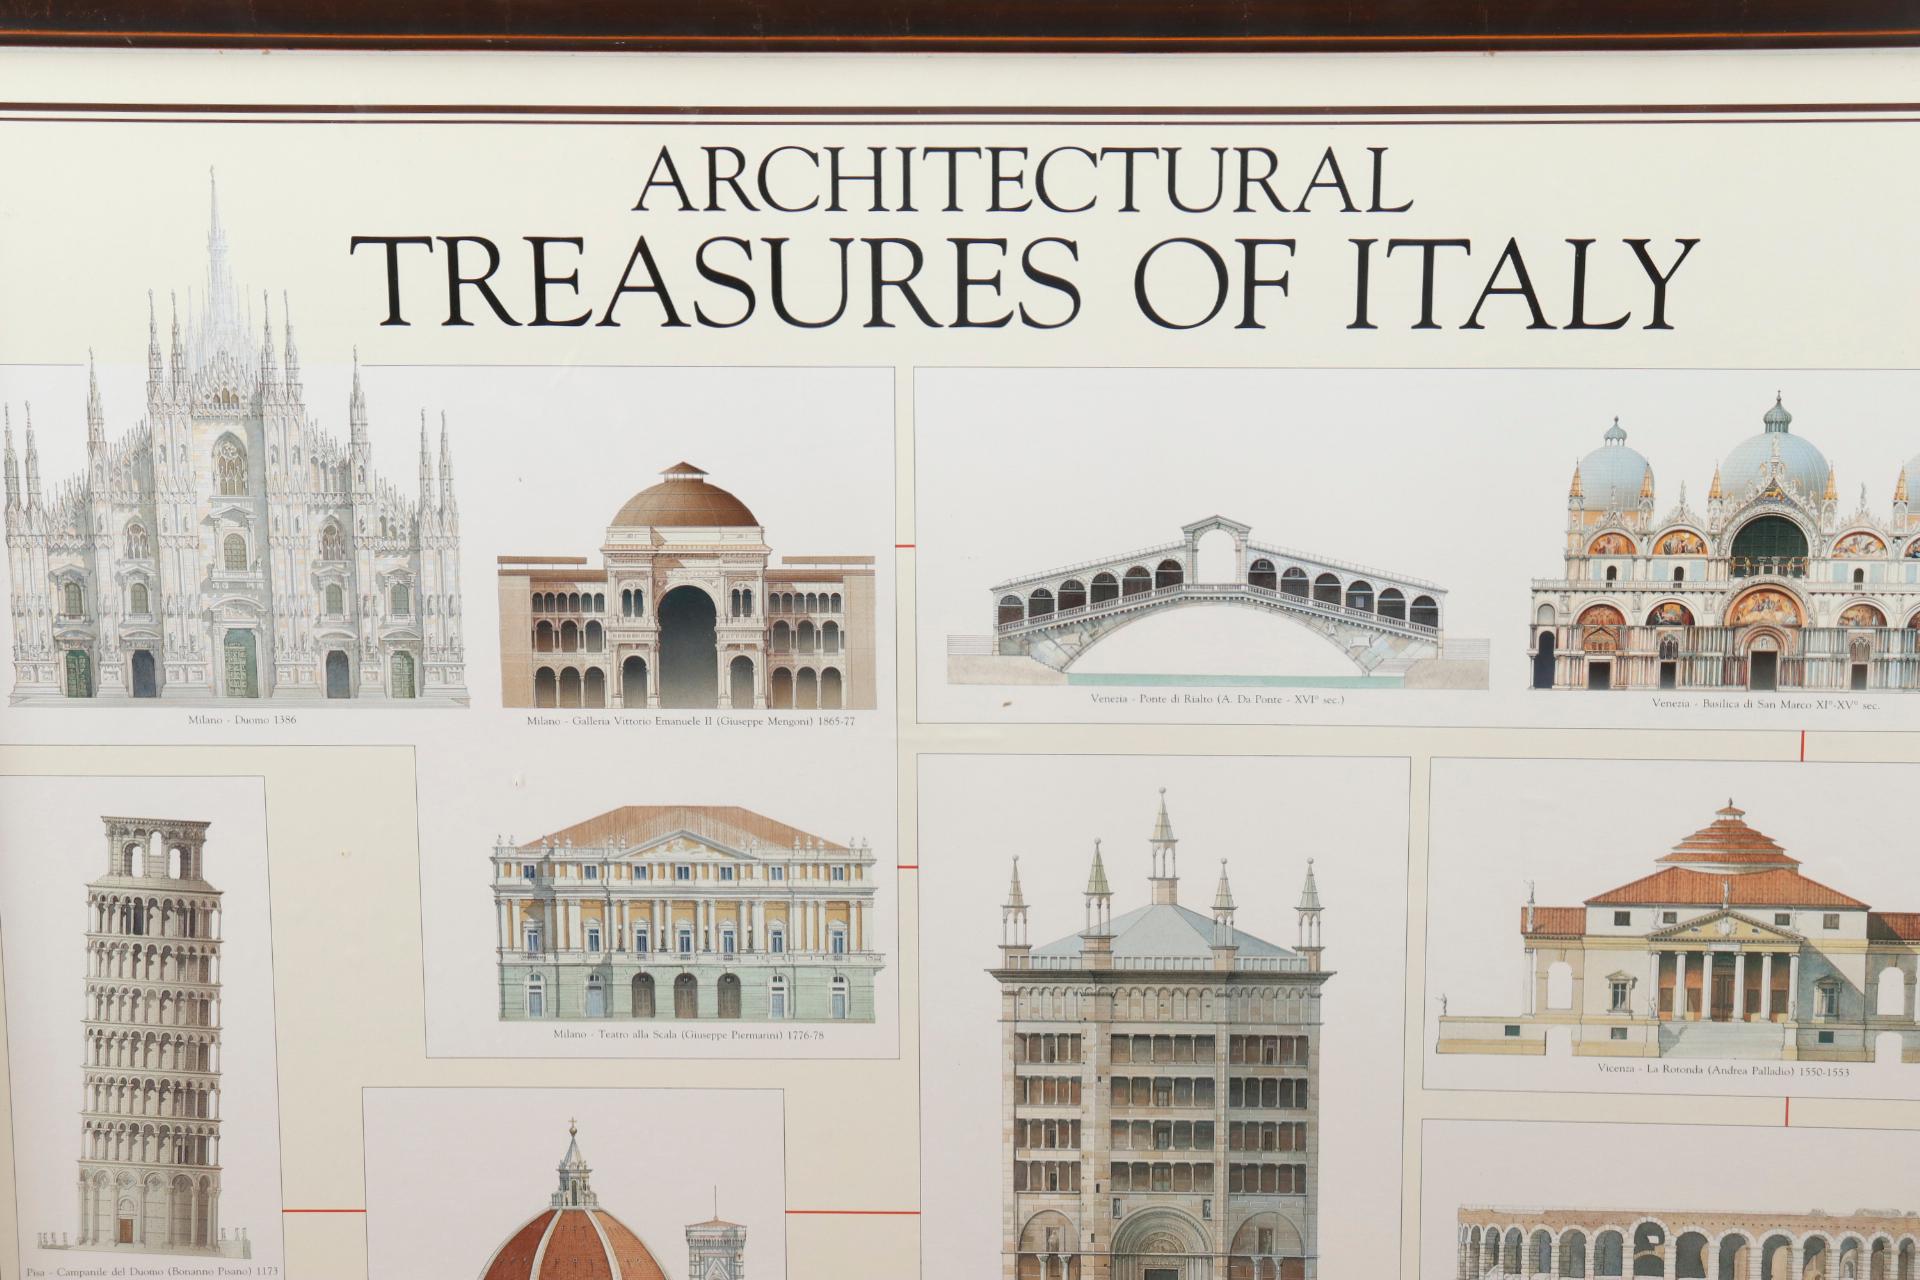 A framed poster titled “Architectural Treasures of Italy” copyright 1995. Illustrations by Libero Patrignani and published by Nuova Arti Grafichi Ricordi S.r.l. of Italy. Depicts 24 famous buildings in Italy. Maker's mark along the bottom reads